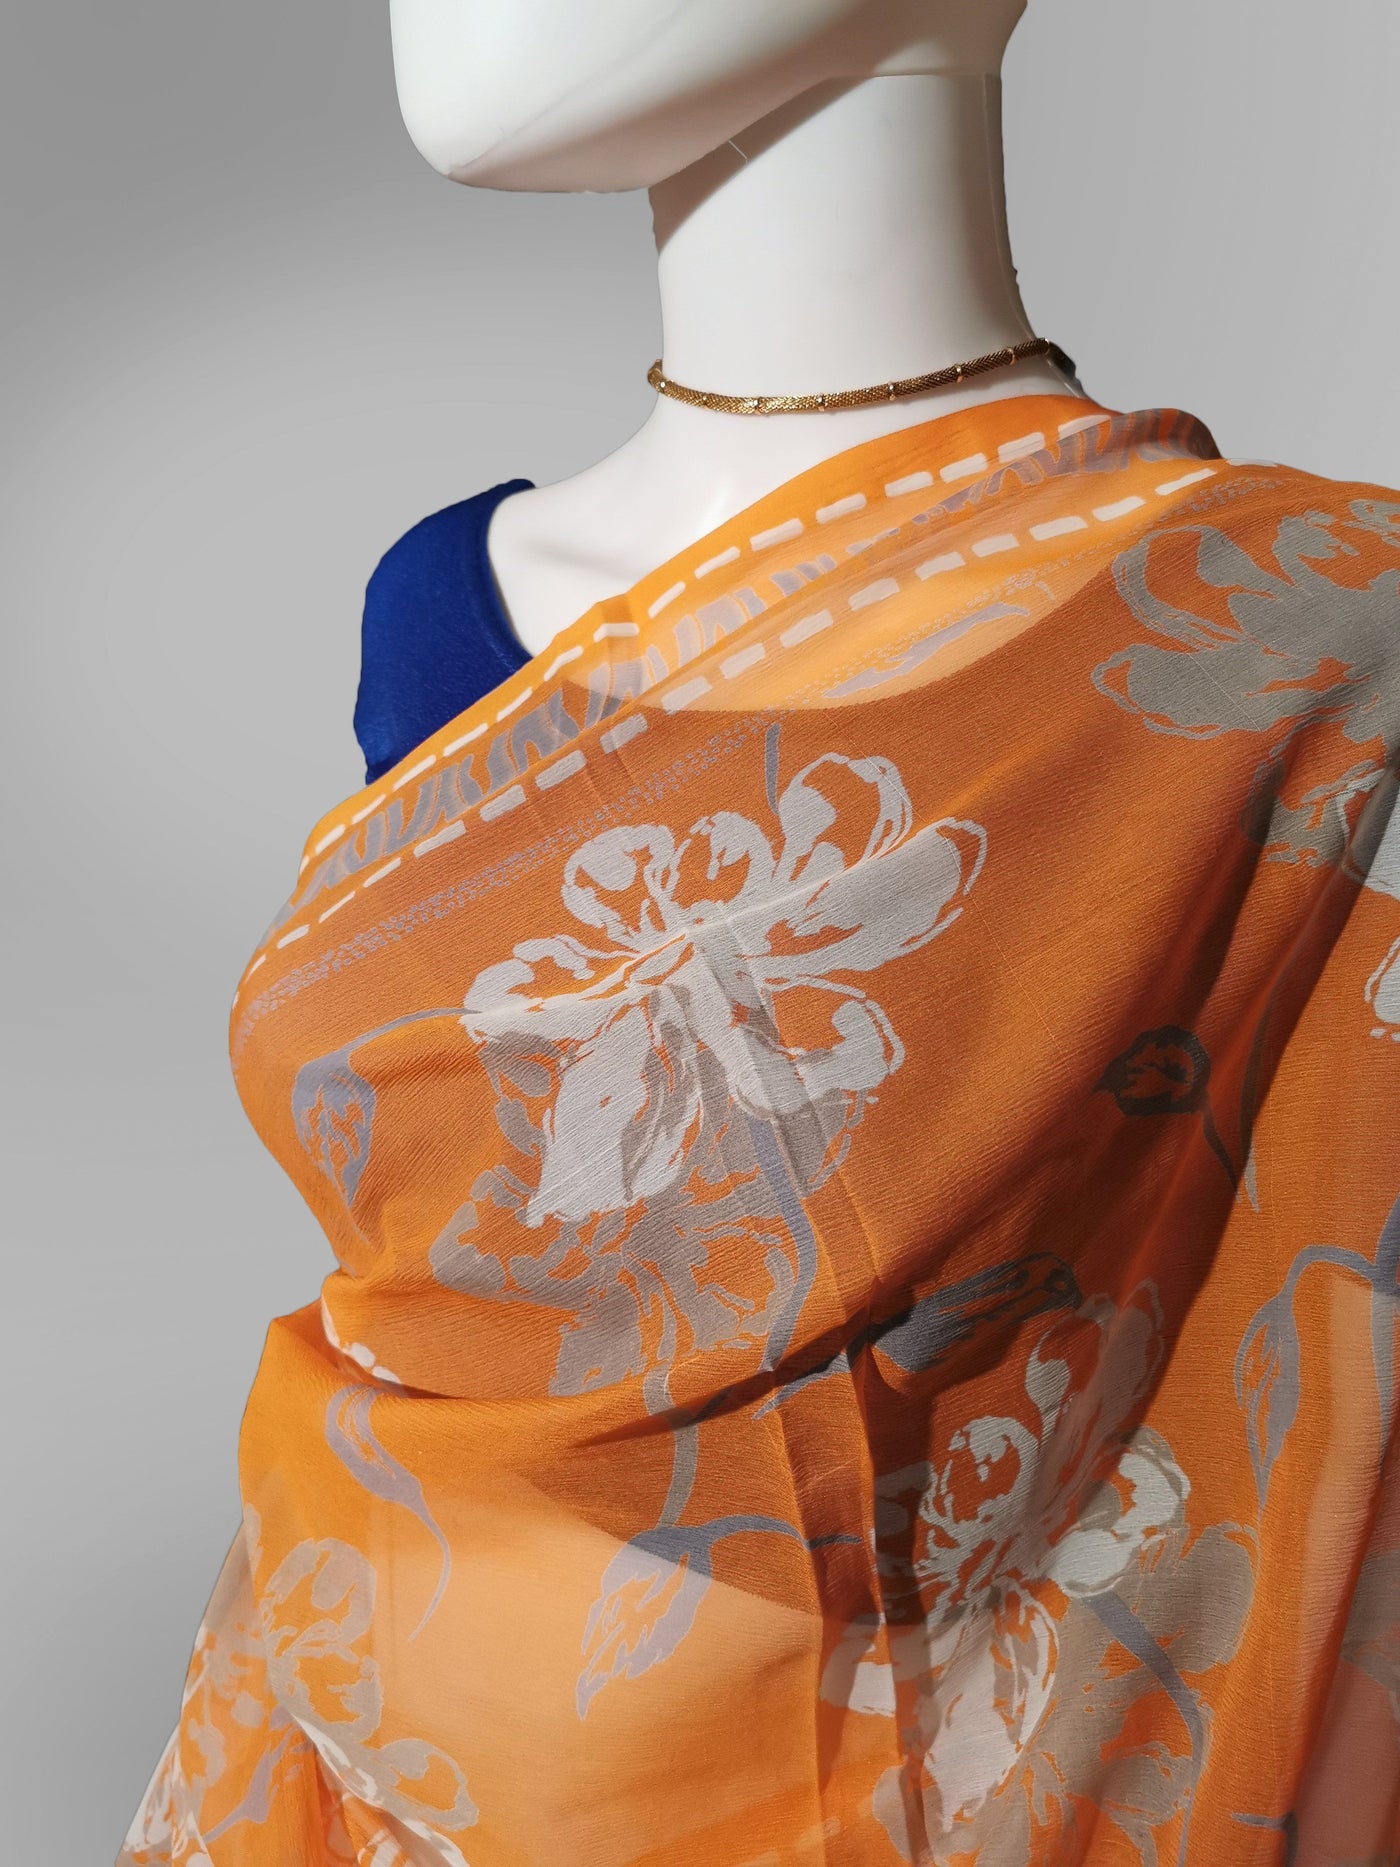 Saree in Orange Blend With Silver Floral Print Indian Clothing in Denver, CO, Aurora, CO, Boulder, CO, Fort Collins, CO, Colorado Springs, CO, Parker, CO, Highlands Ranch, CO, Cherry Creek, CO, Centennial, CO, and Longmont, CO. NATIONWIDE SHIPPING USA- India Fashion X